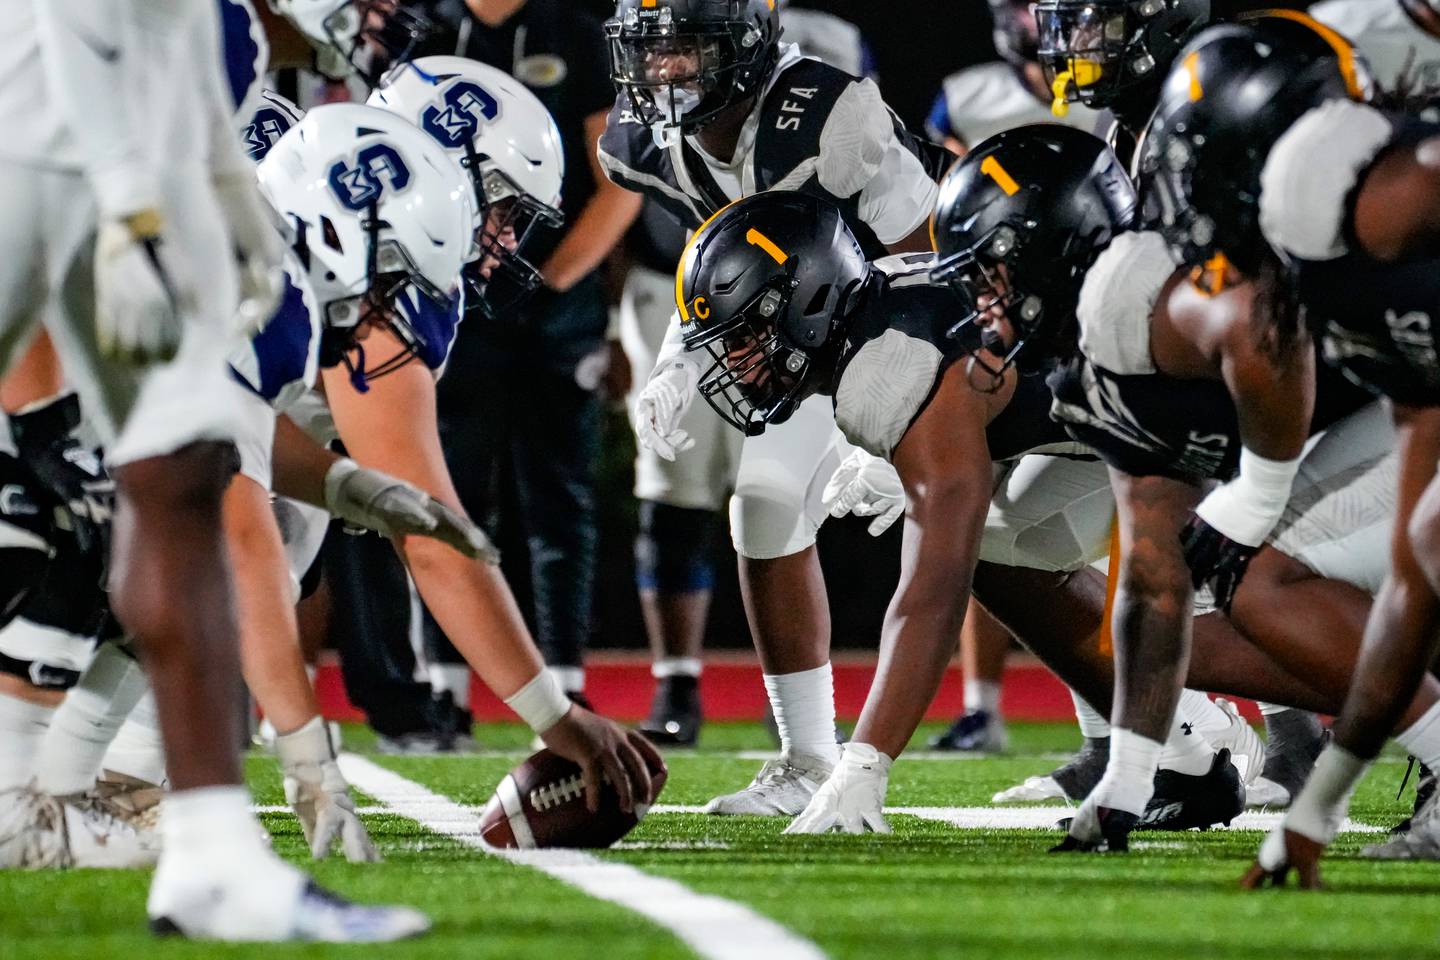 St. Frances faces St. Thomas More at Under Armour Stadium in Baltimore, Md. on Saturday, Sept. 30, 2023.